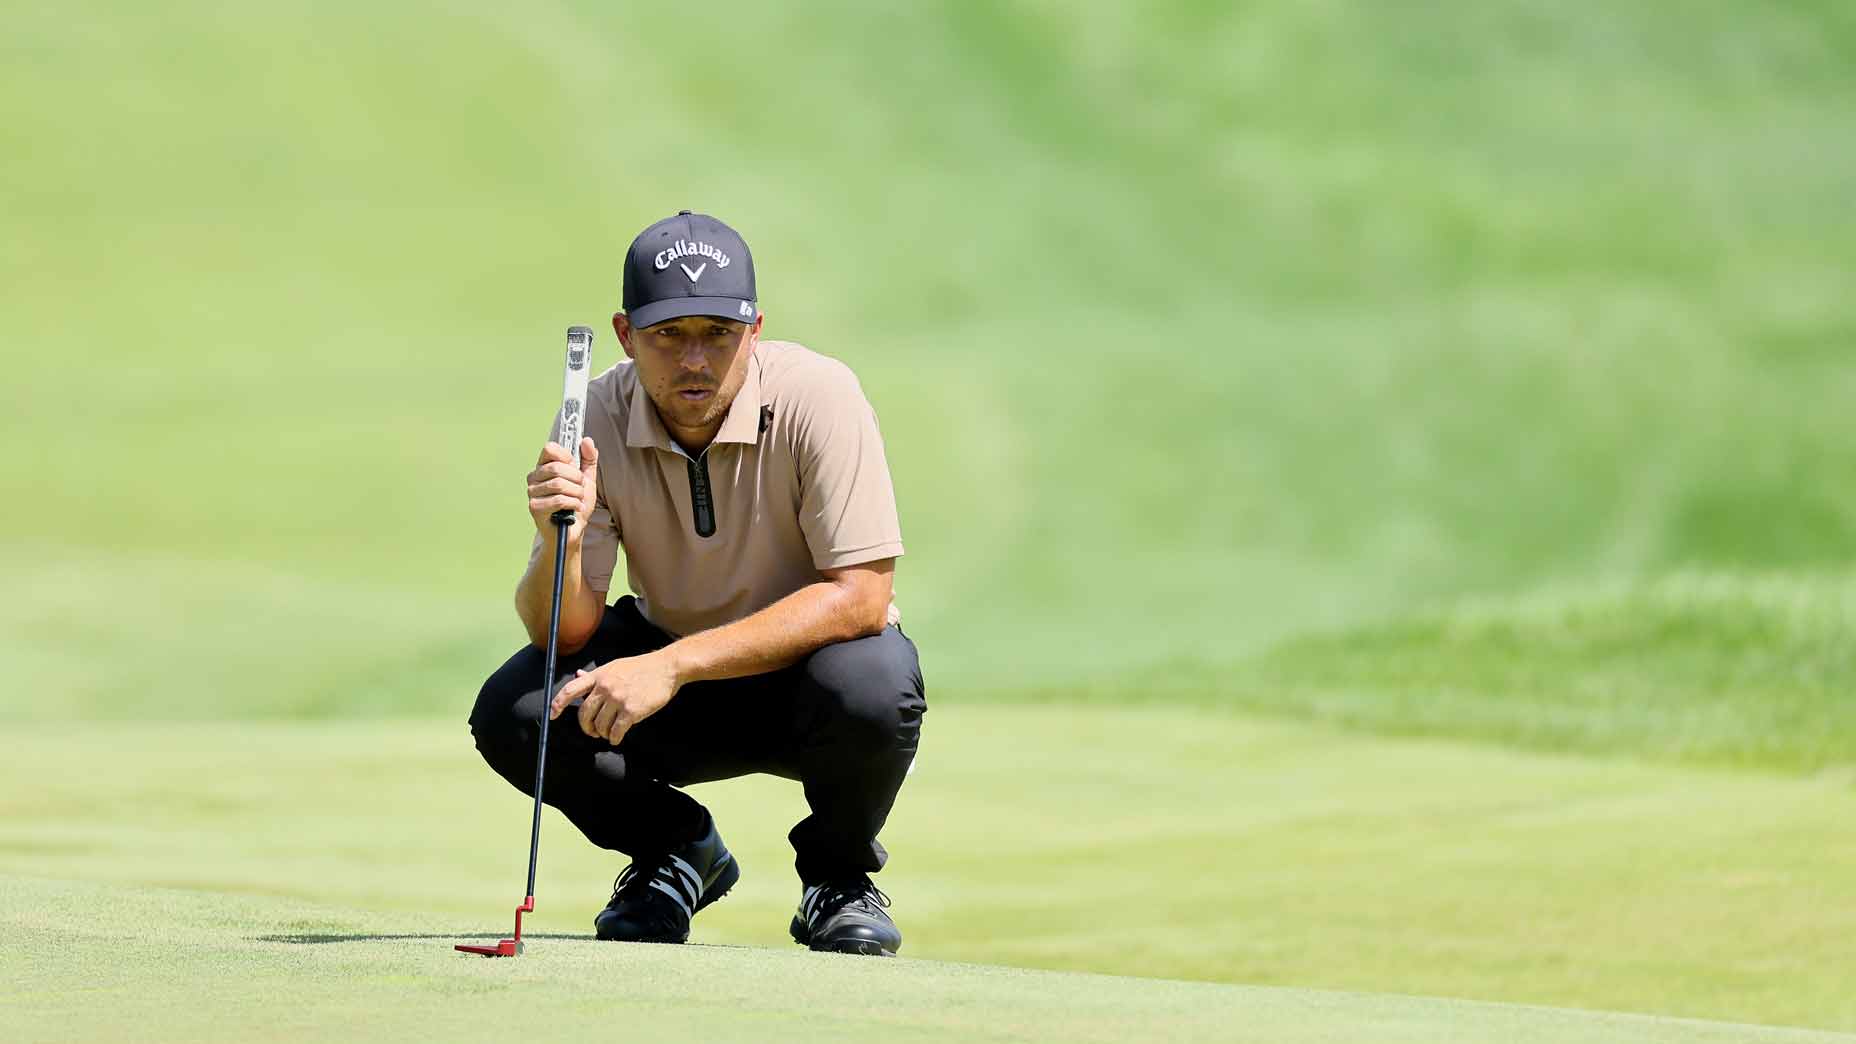 Xander Schauffele explains a simple trick that helps golfers effectively read greens, giving them more confidence to make more putts